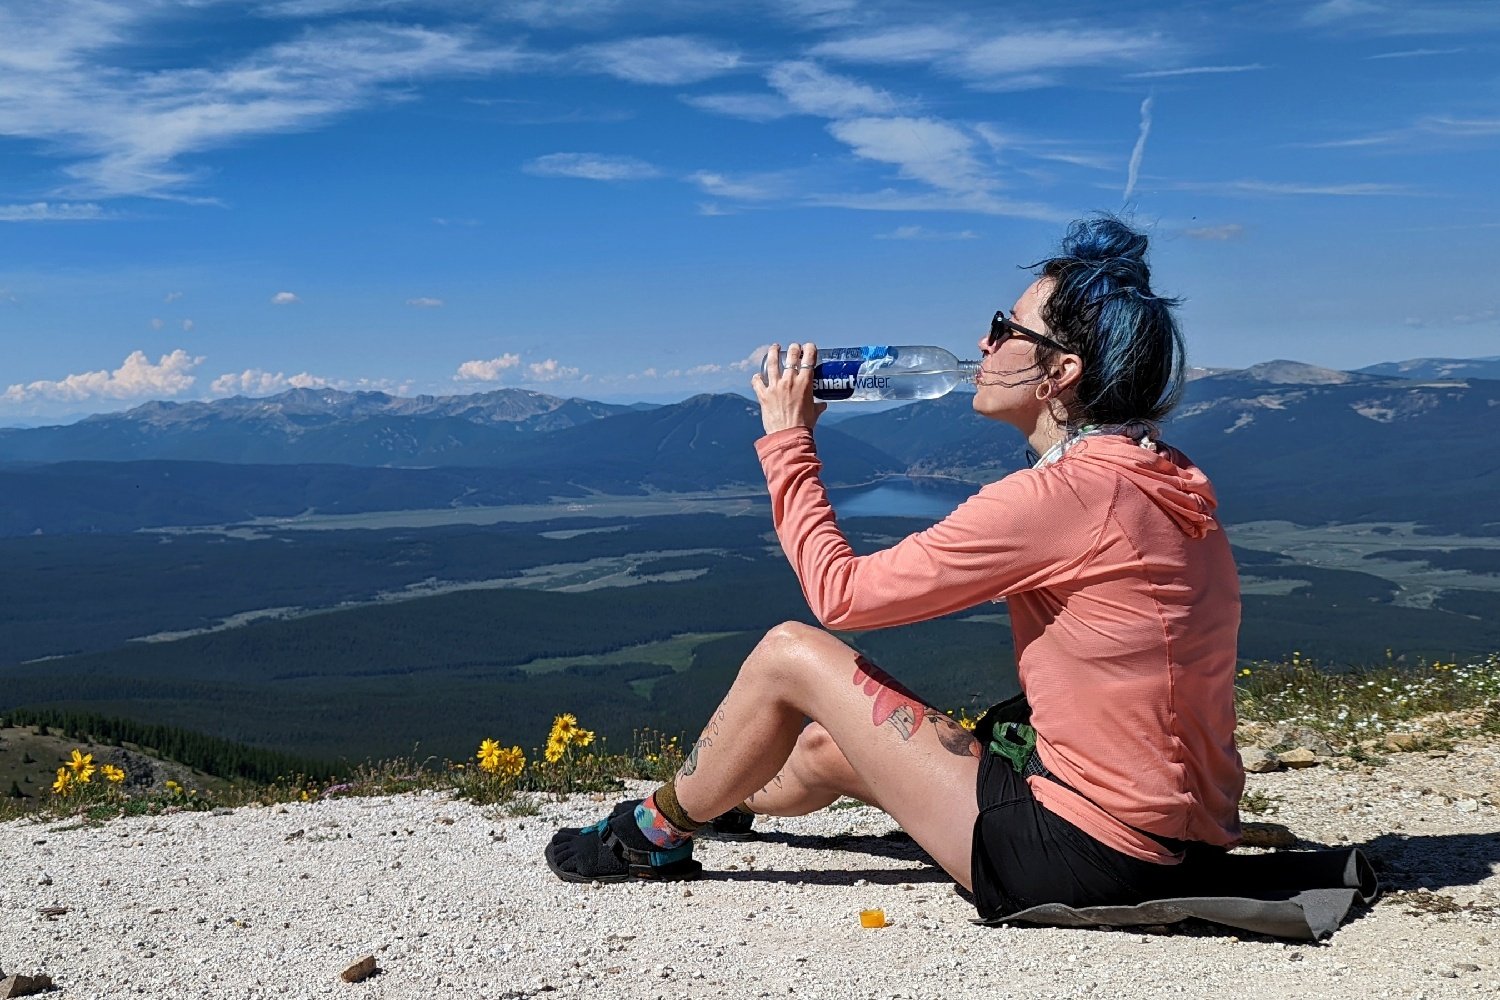 A hiker sitting on the ground drinking from a water bottle on a high elevation mountain pass